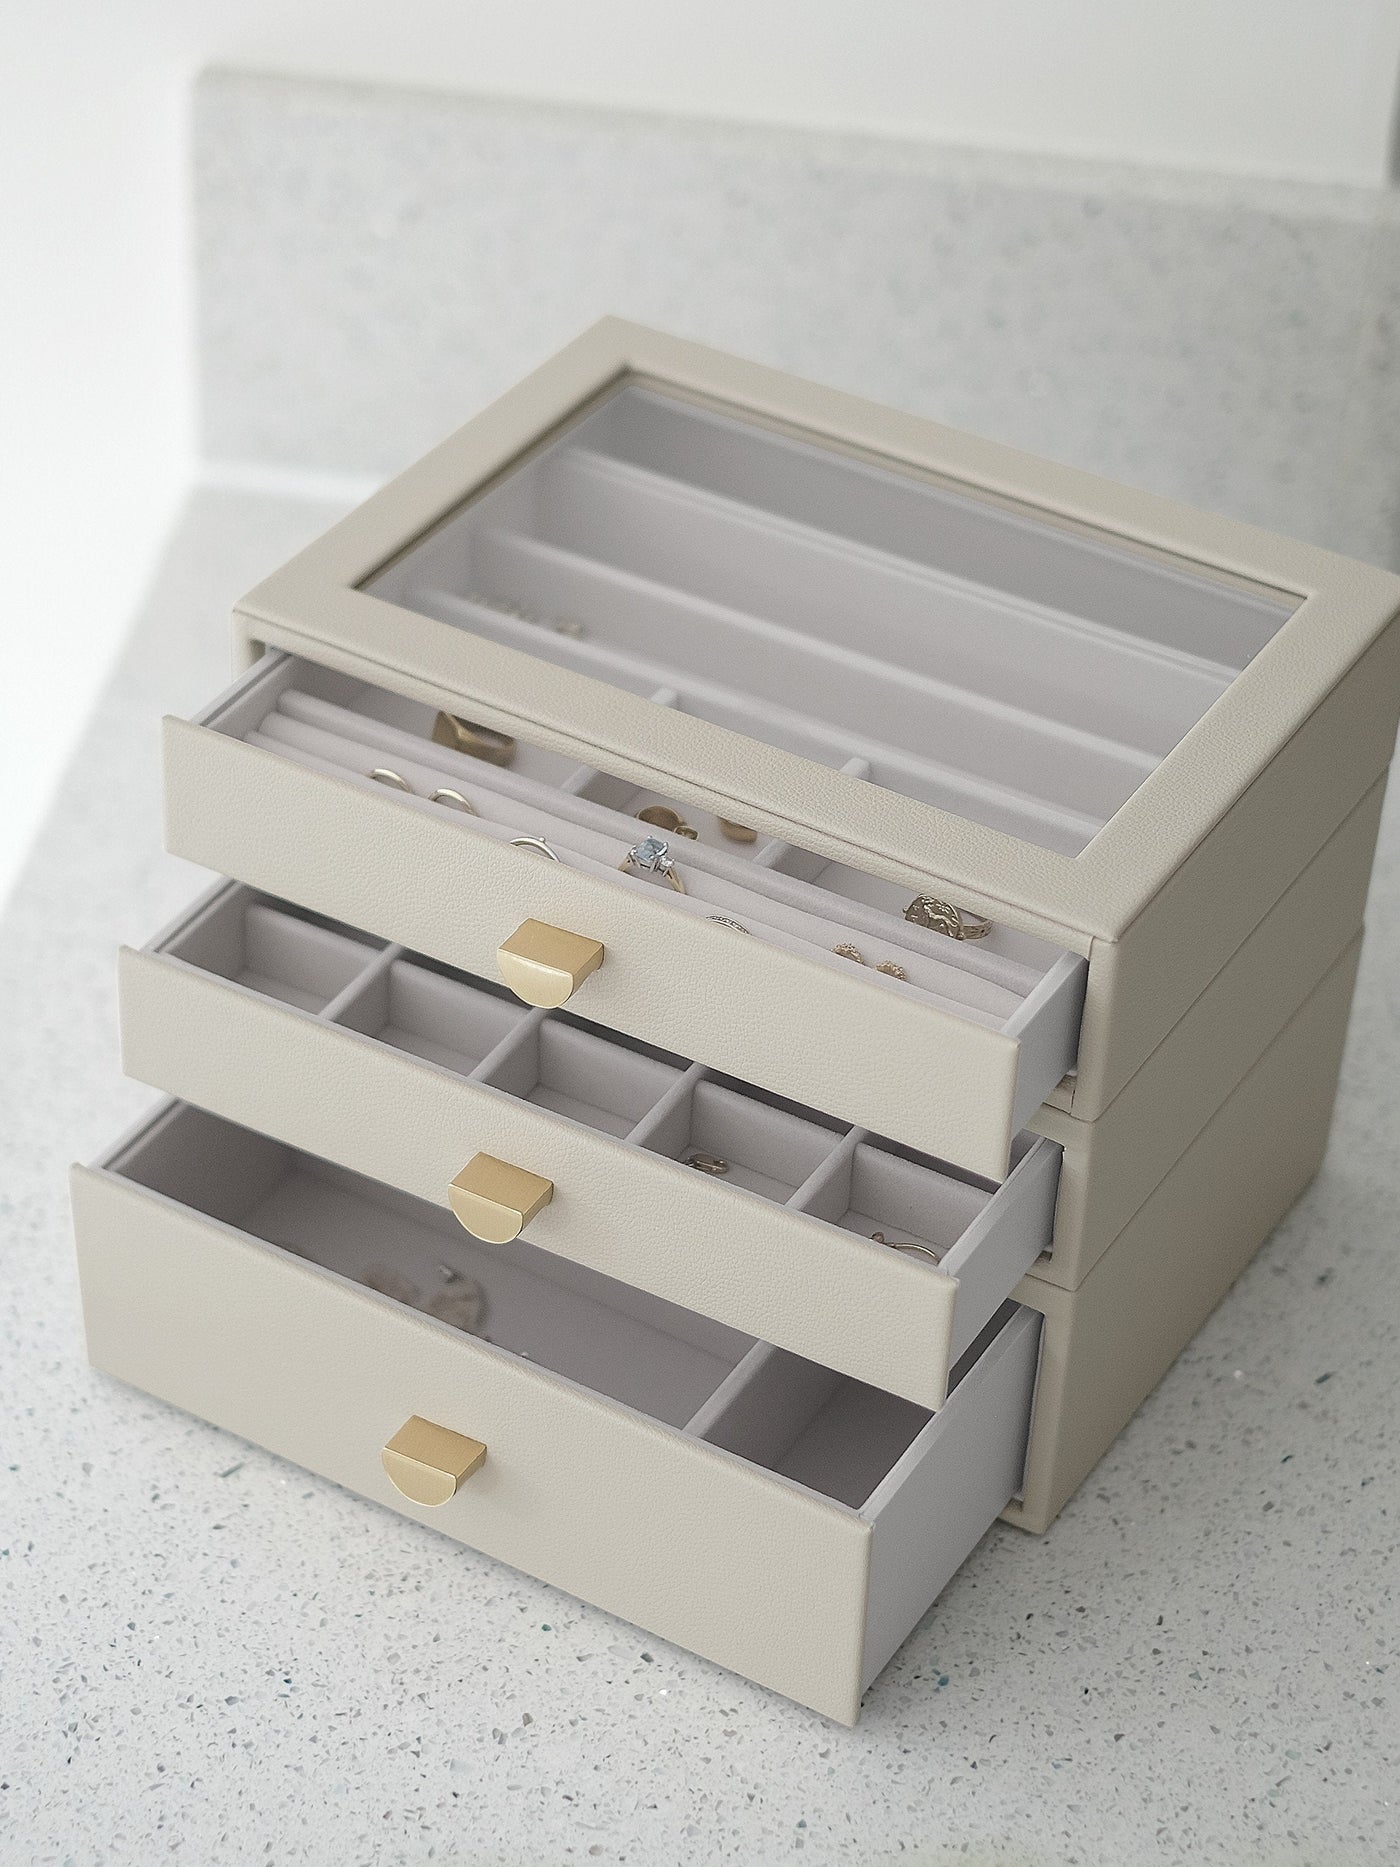 Stackers. Oatmeal Pebble Classic Jewellery Box - Set of 3 (with drawers) *STOCK DUE FEB* - timeframedclocks